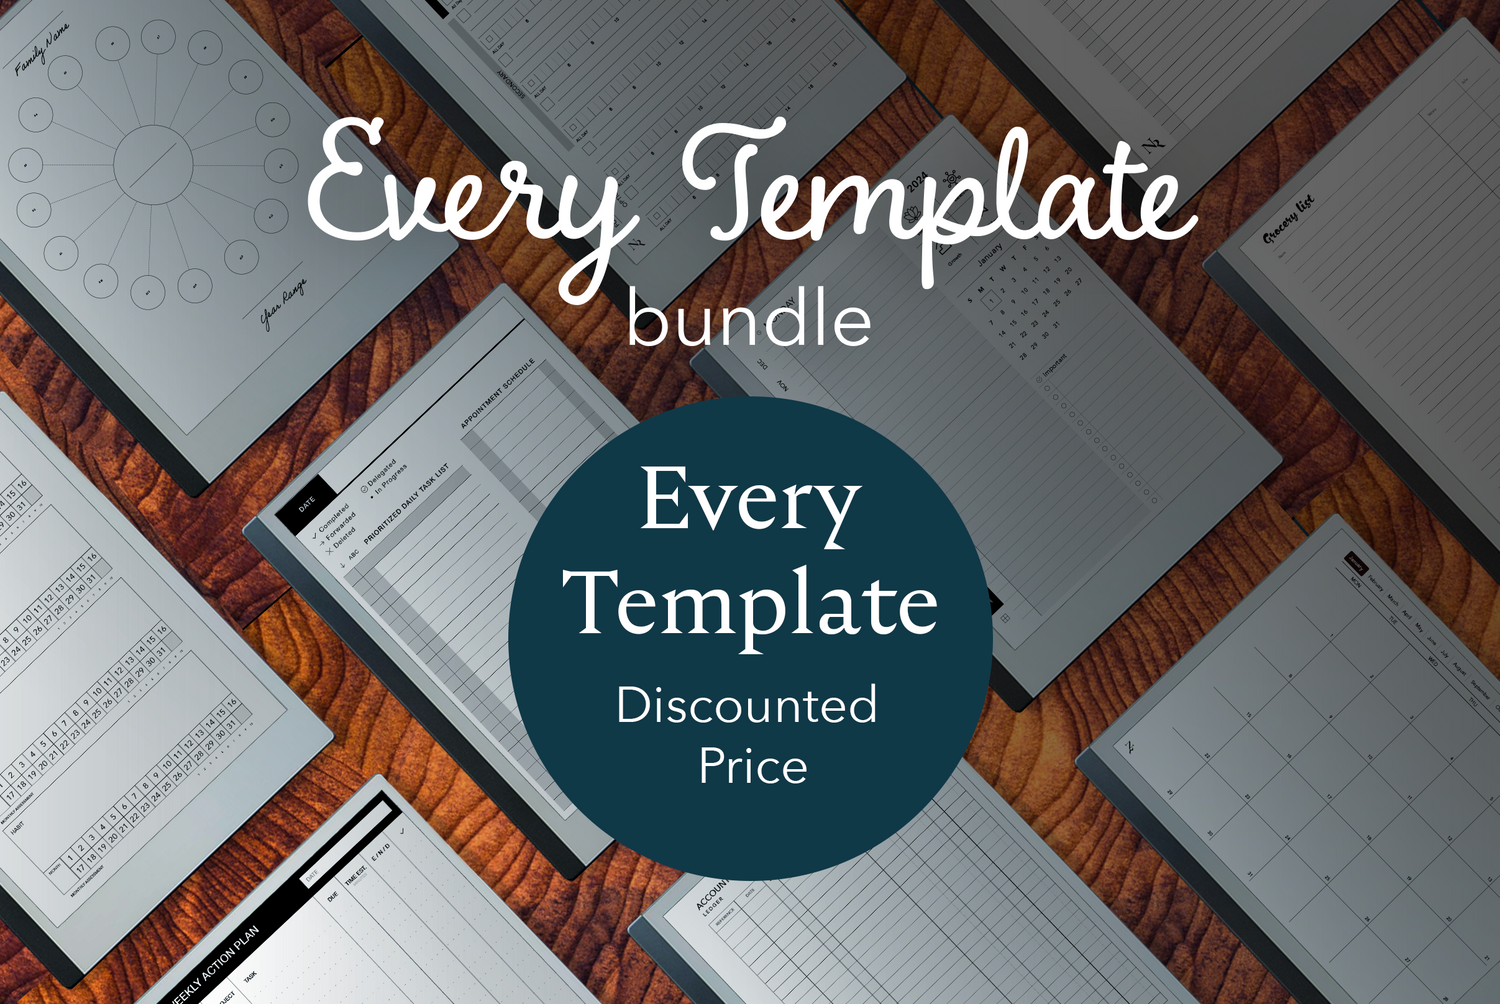 Remarkable 1 & 2 Notebook Cover Templates Bundle 3 for Your